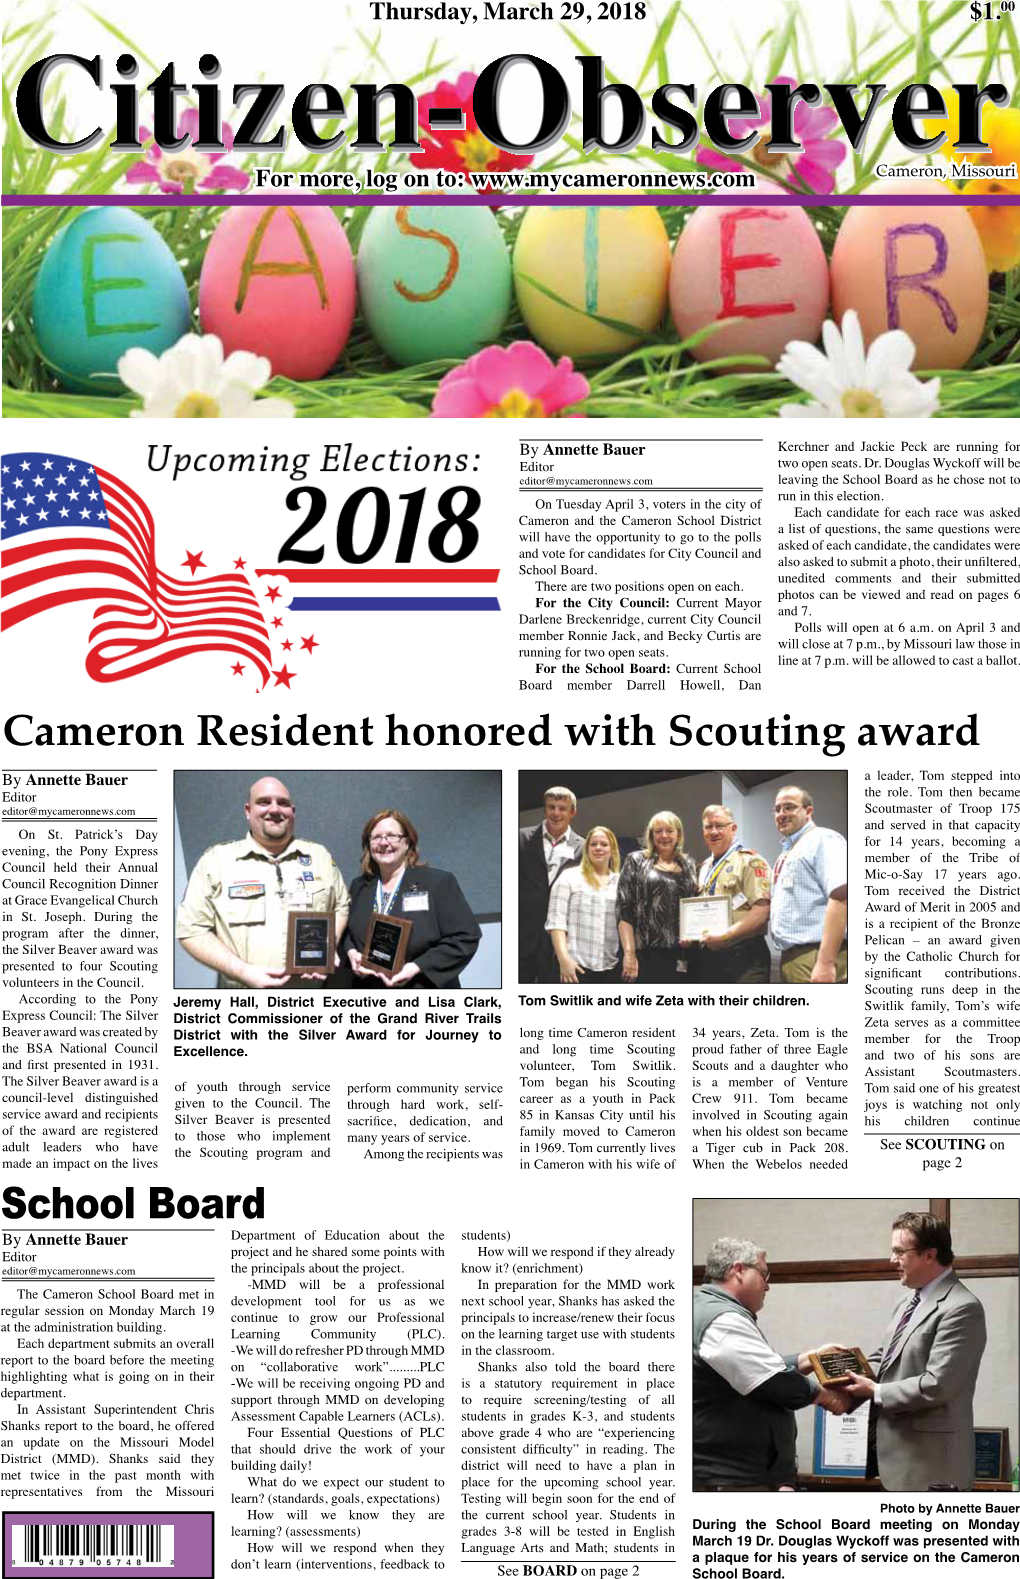 Cameron Resident Honored with Scouting Award School Board